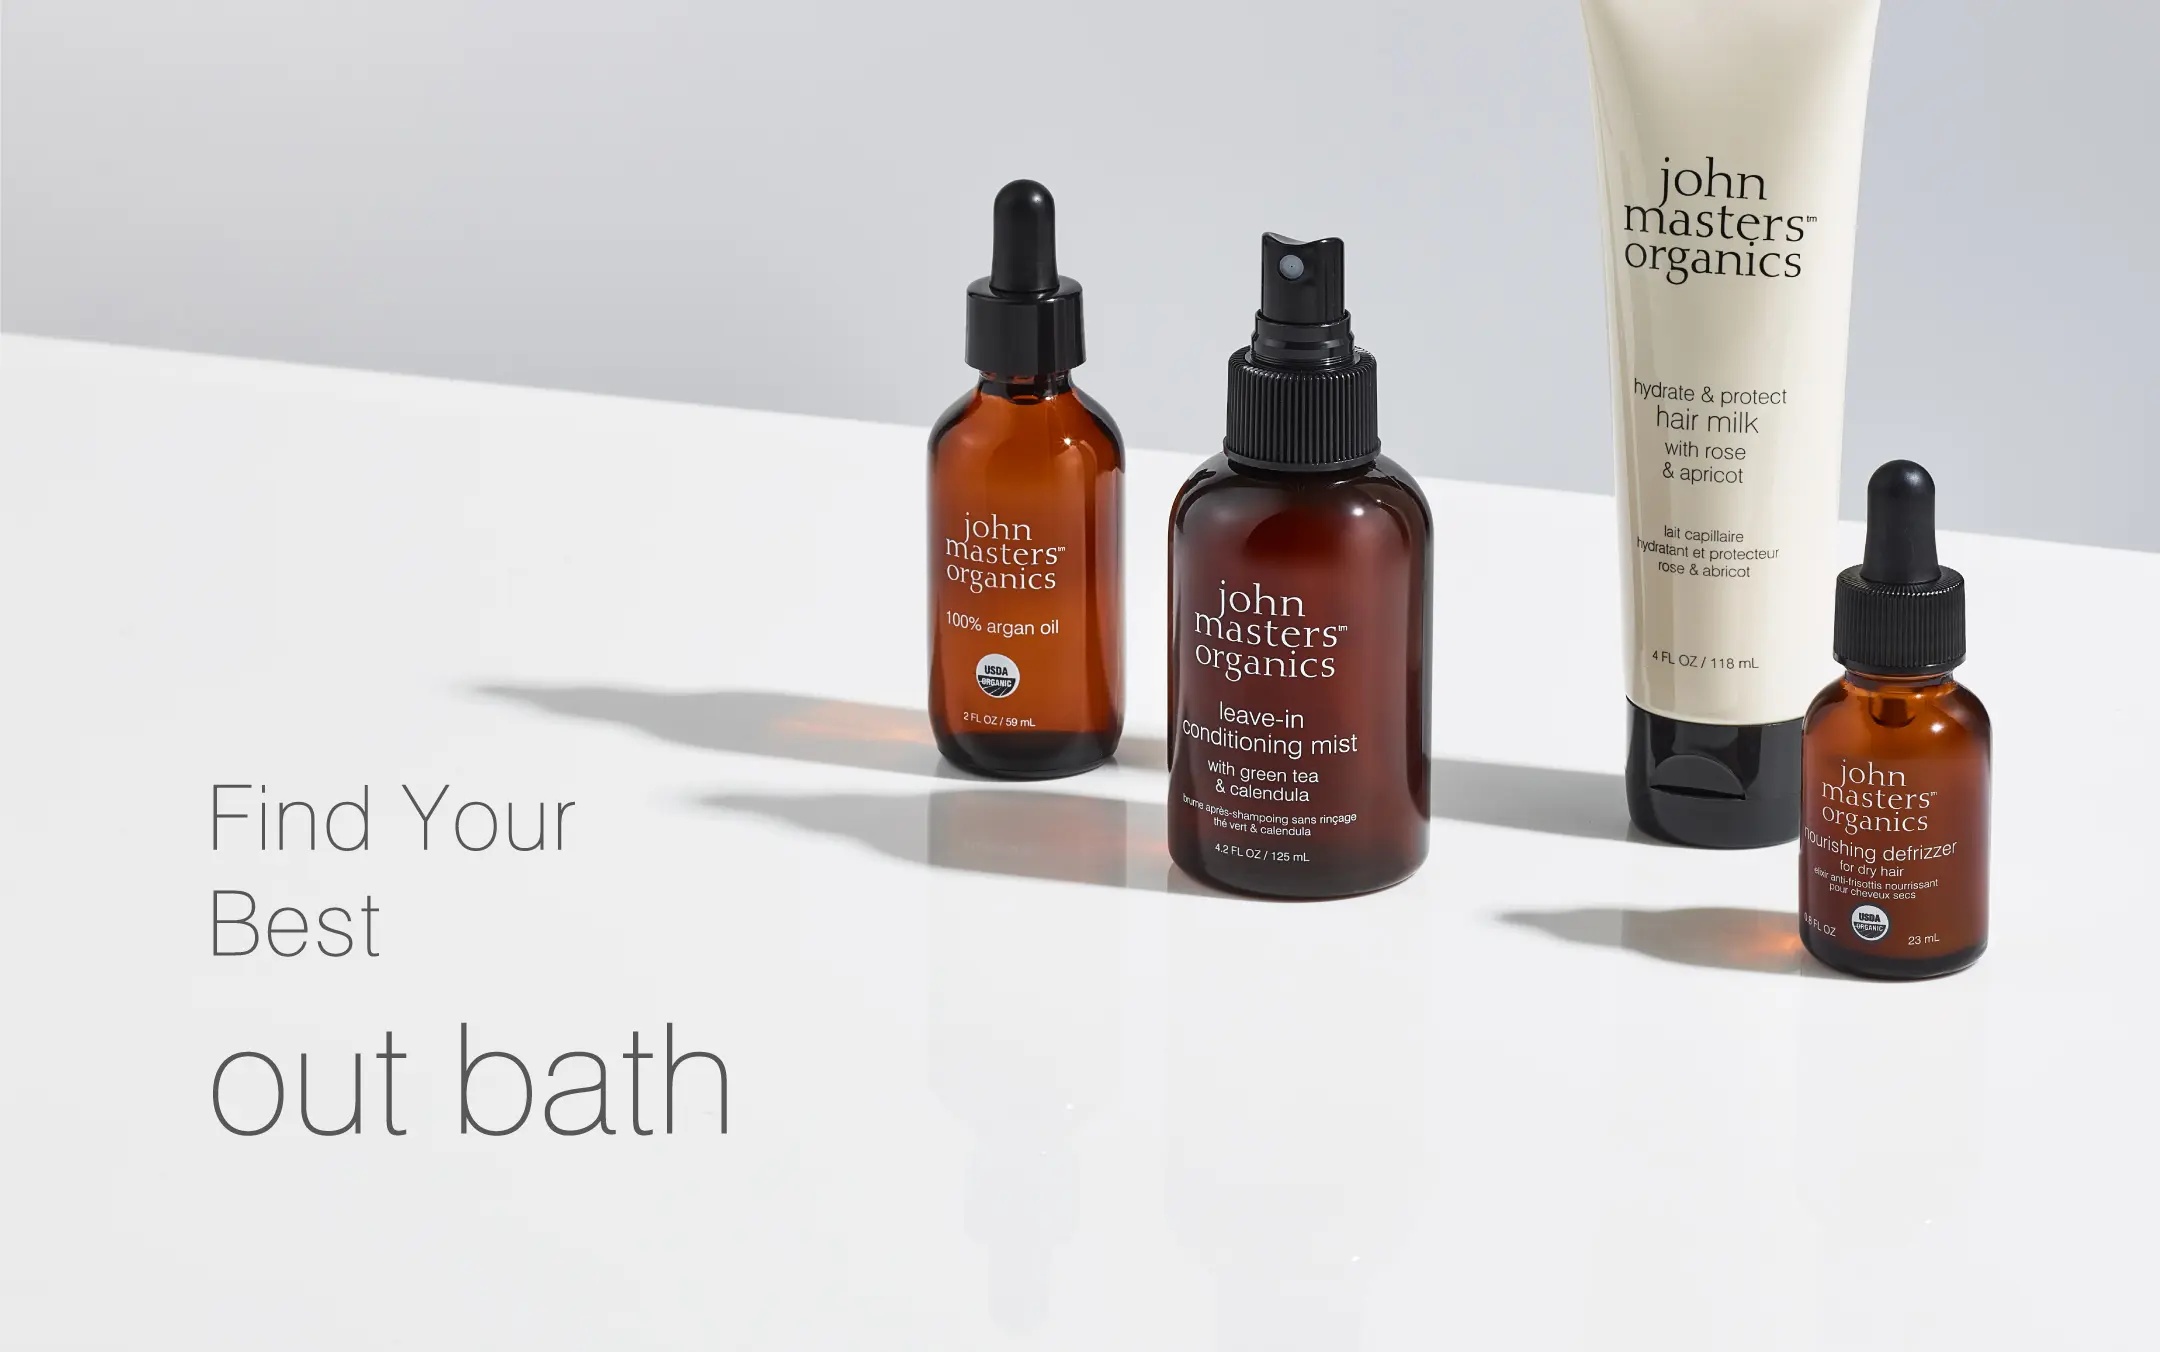 Find Your Best out bath